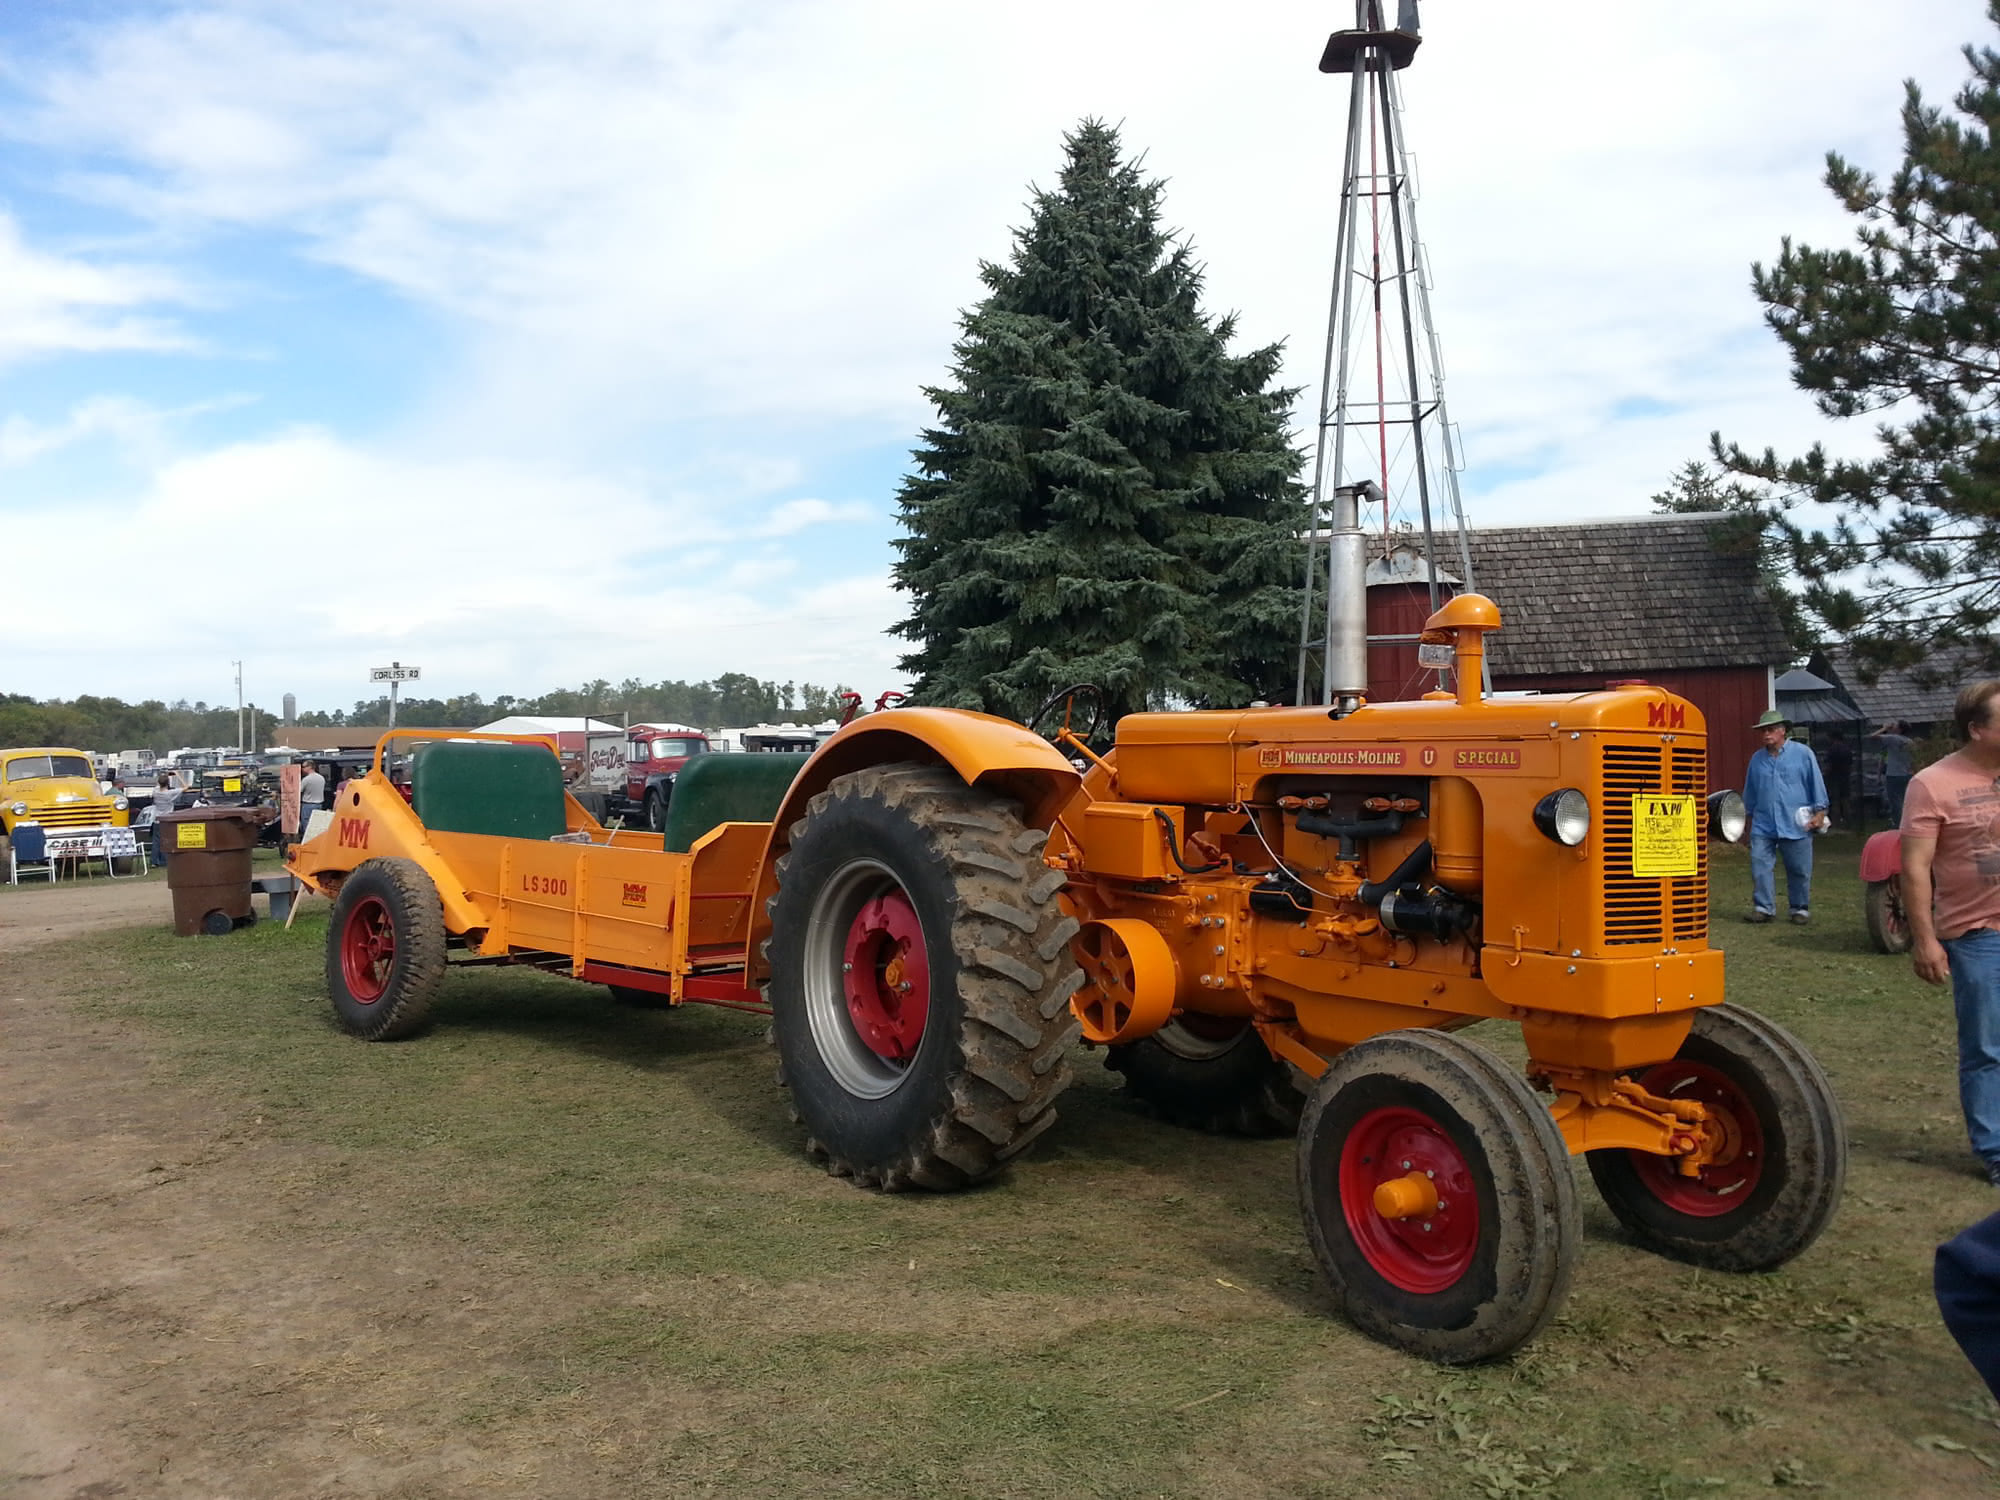 A close-up of a row of vintage tractors